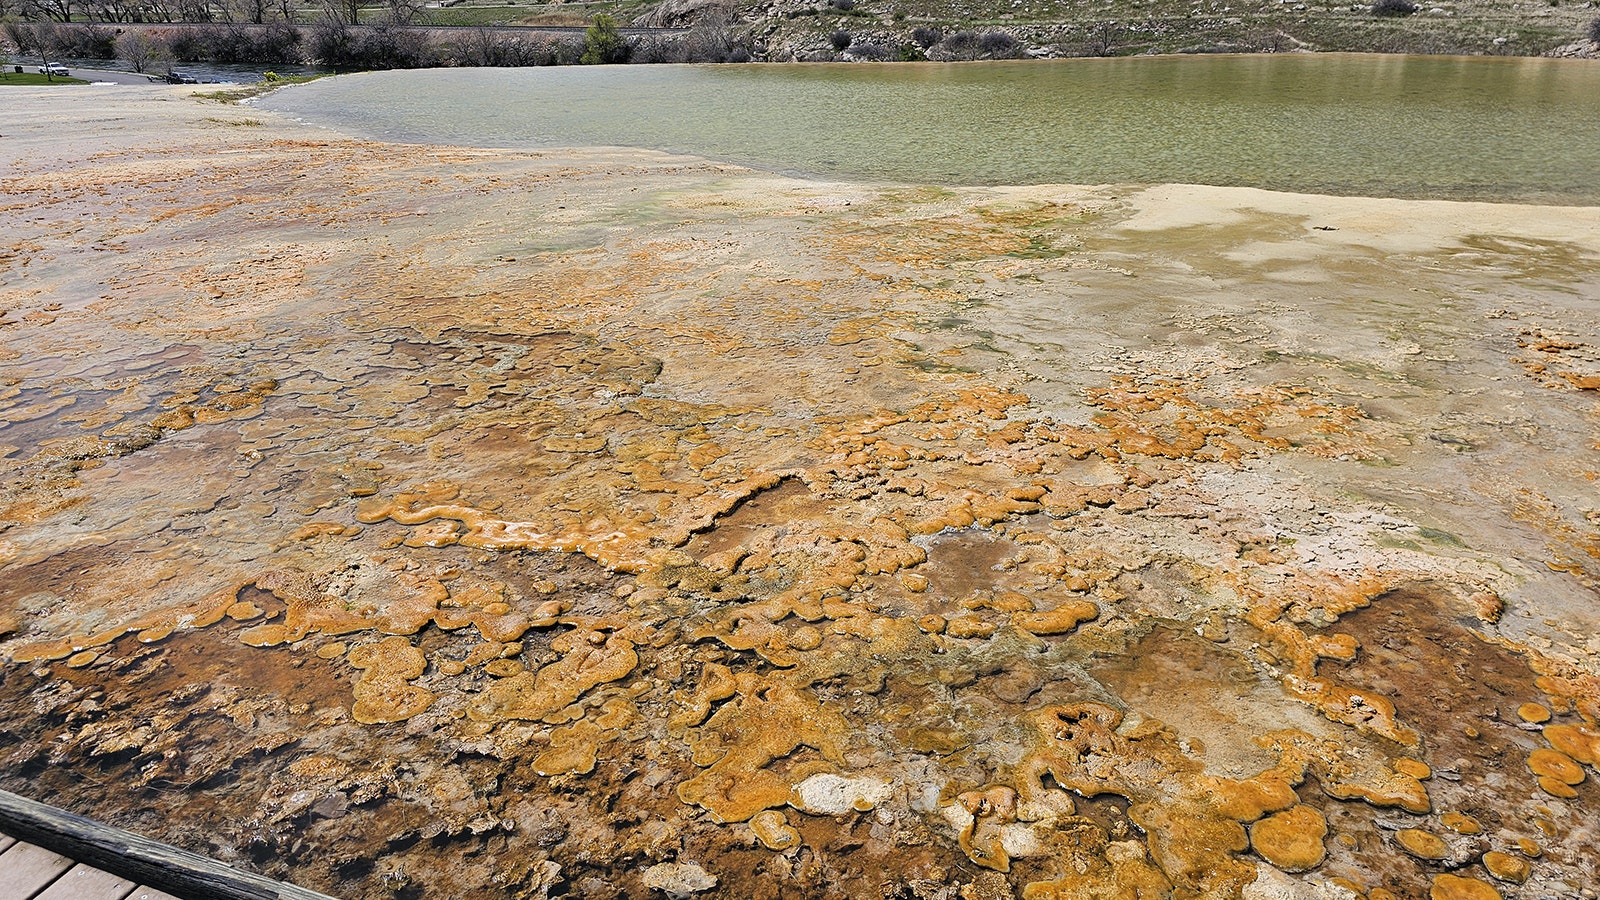 While some of the algae at Hot Springs State Park is blue and green, here it is deep orange and rusty red. The temperature of the water and the minerals present are what determine the actual color of the algae that grows in the thermal waters.